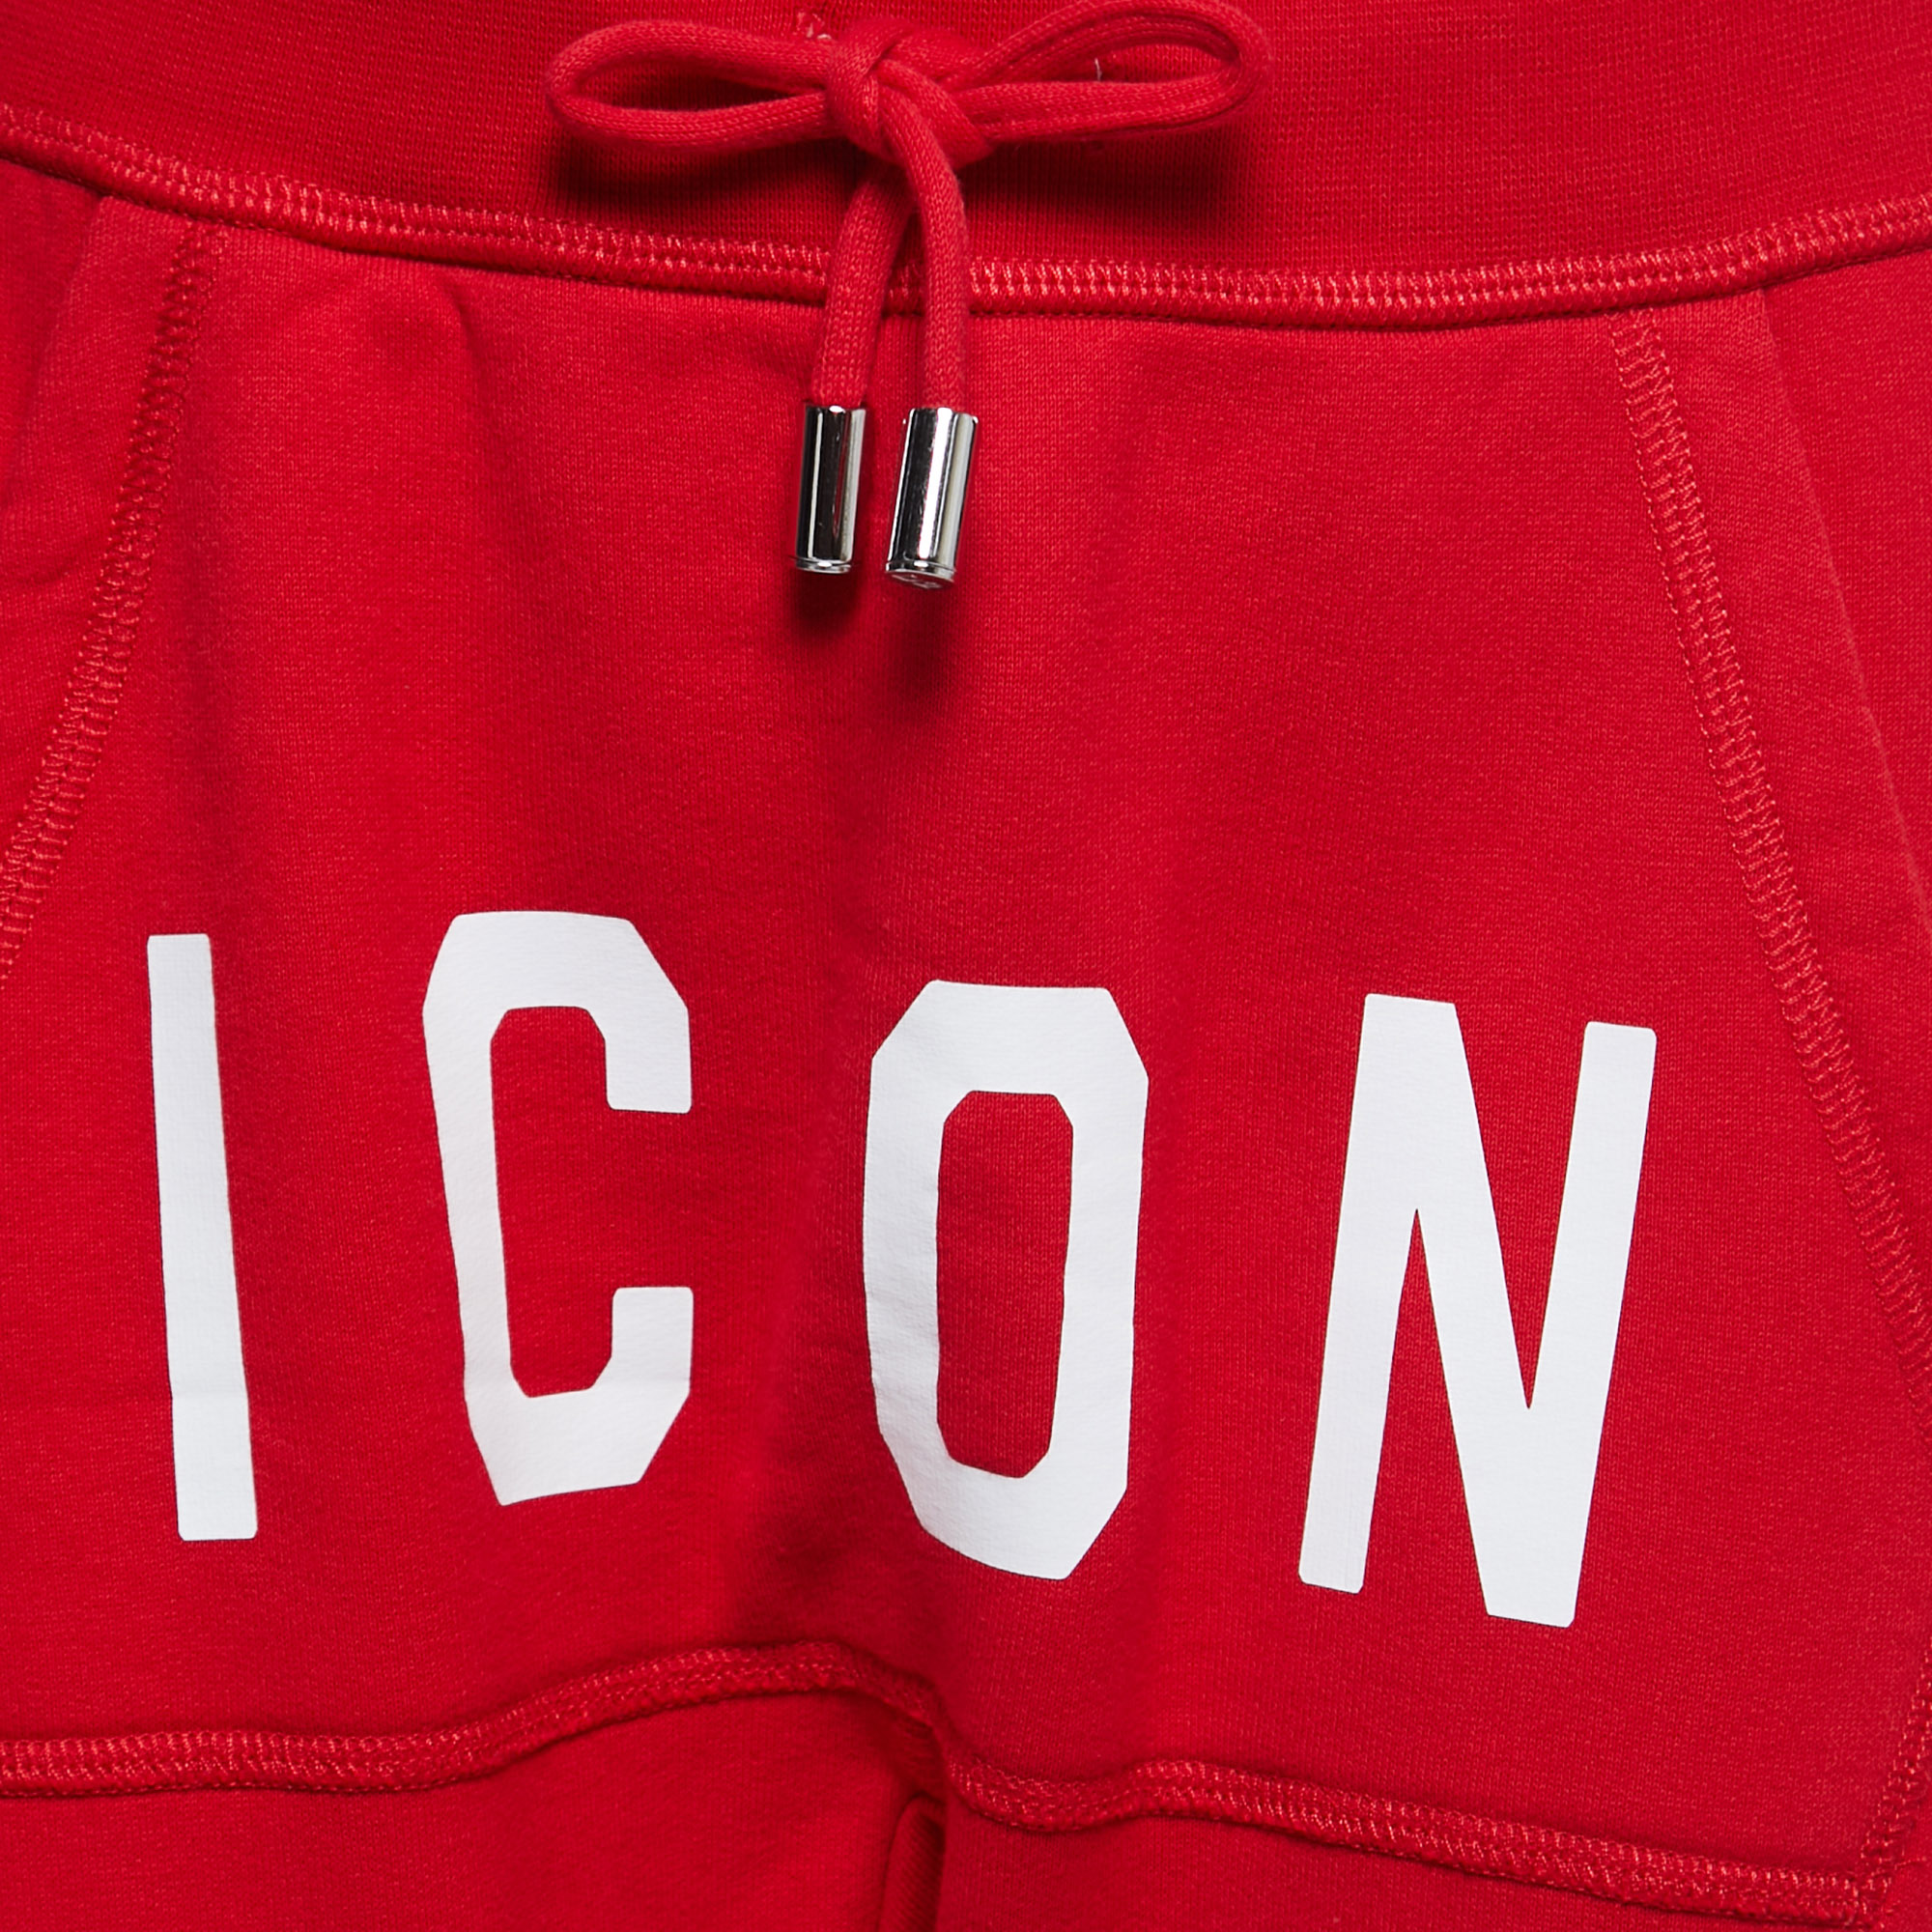 Dsquared2 Red Cotton Icon Print Joggers S